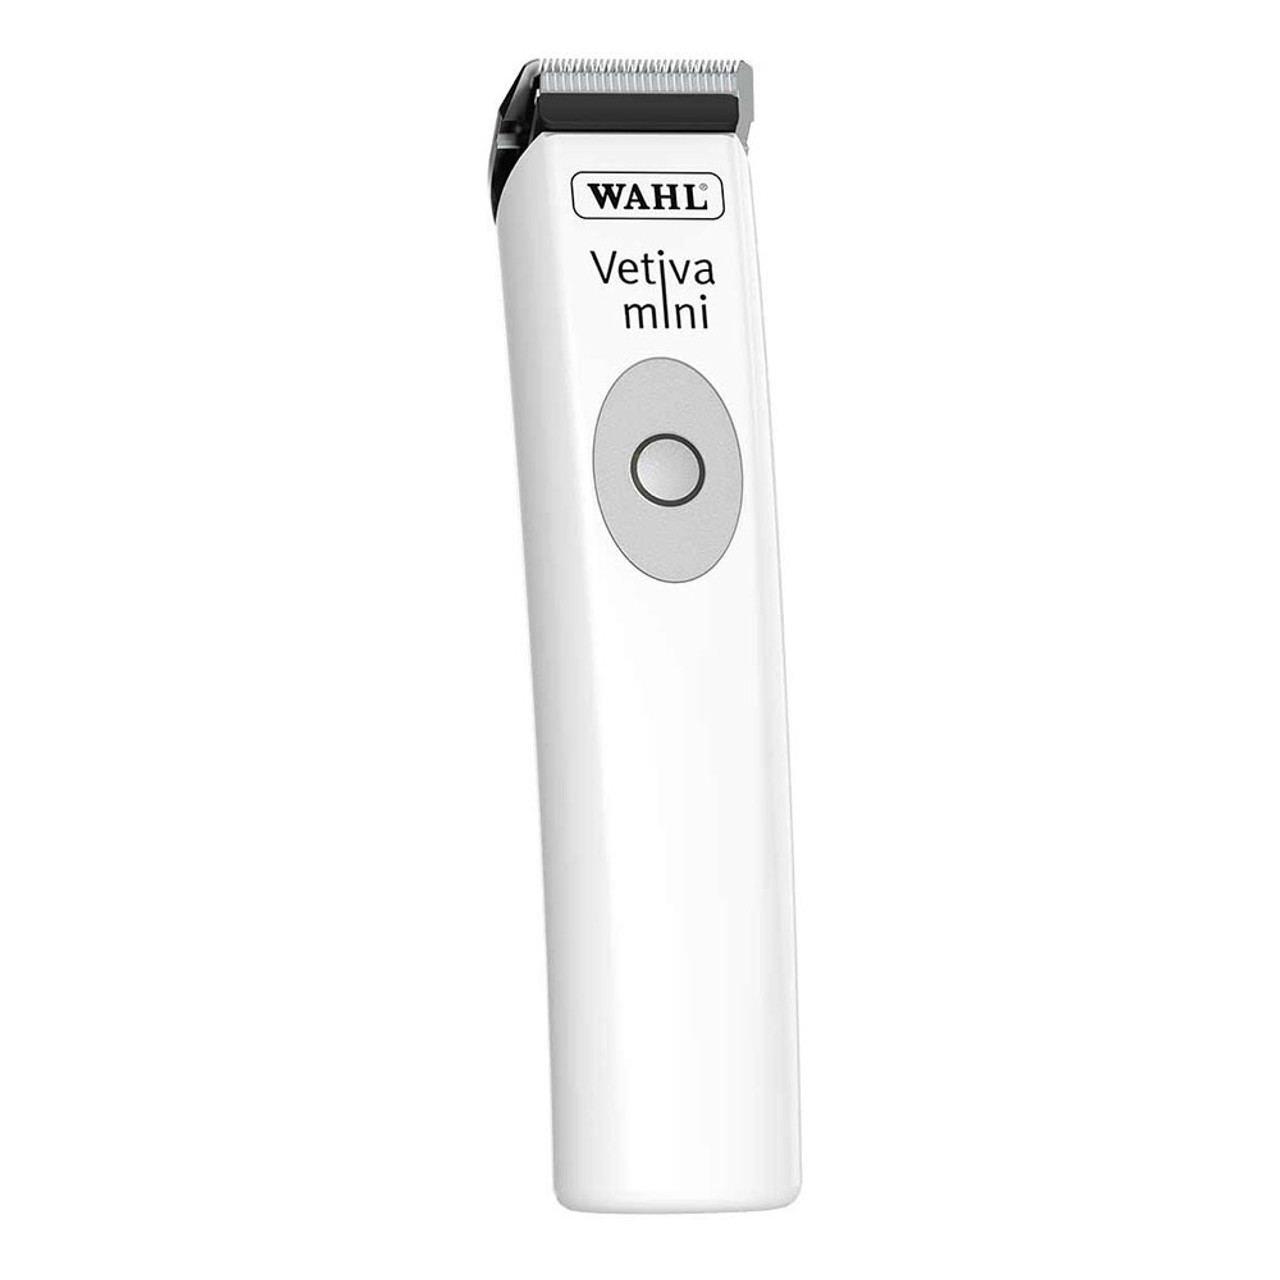 Wahl Mini Cordless Trimmer